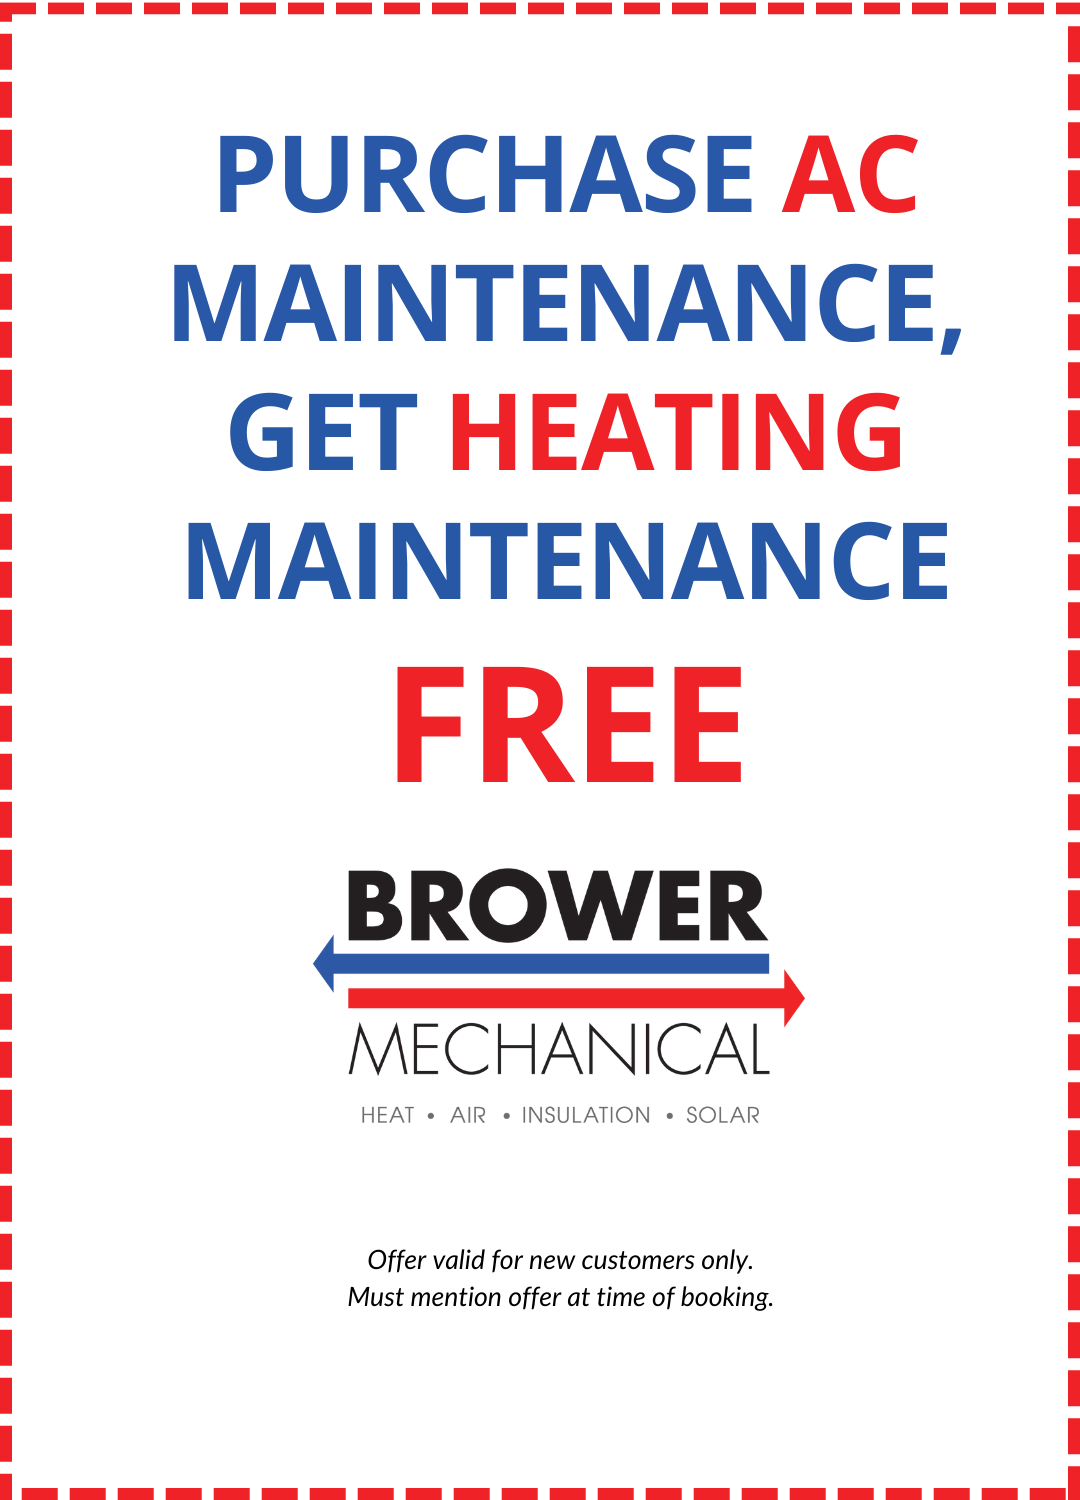 Brower Special AC and Heating Maintenance Coupon Offer Graphic